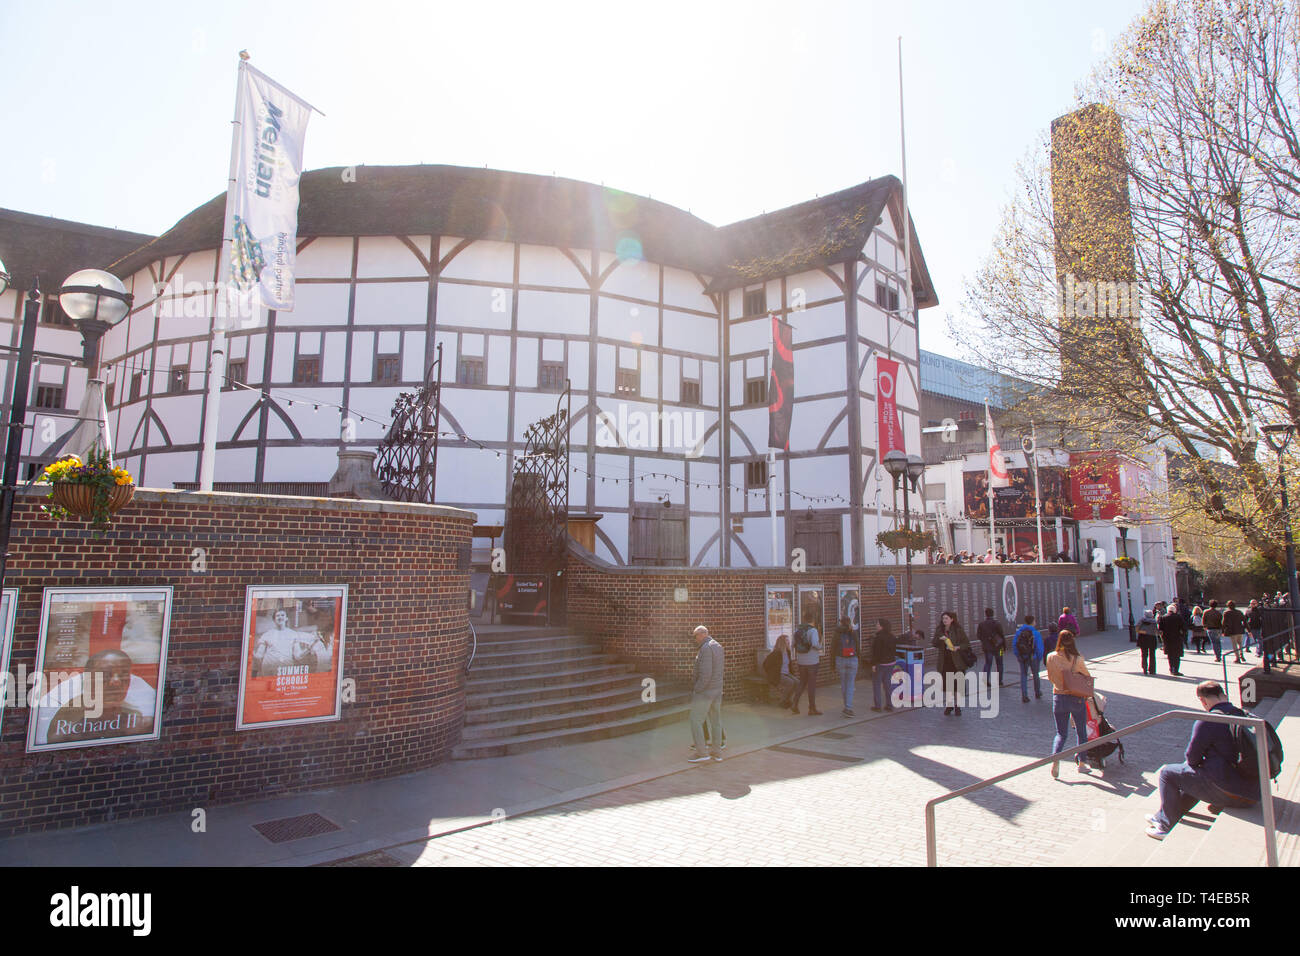 Shakespeare's Globe is the complex housing a reconstruction of the Globe Theatre, South Bank, London, England, united Kingdom. Stock Photo